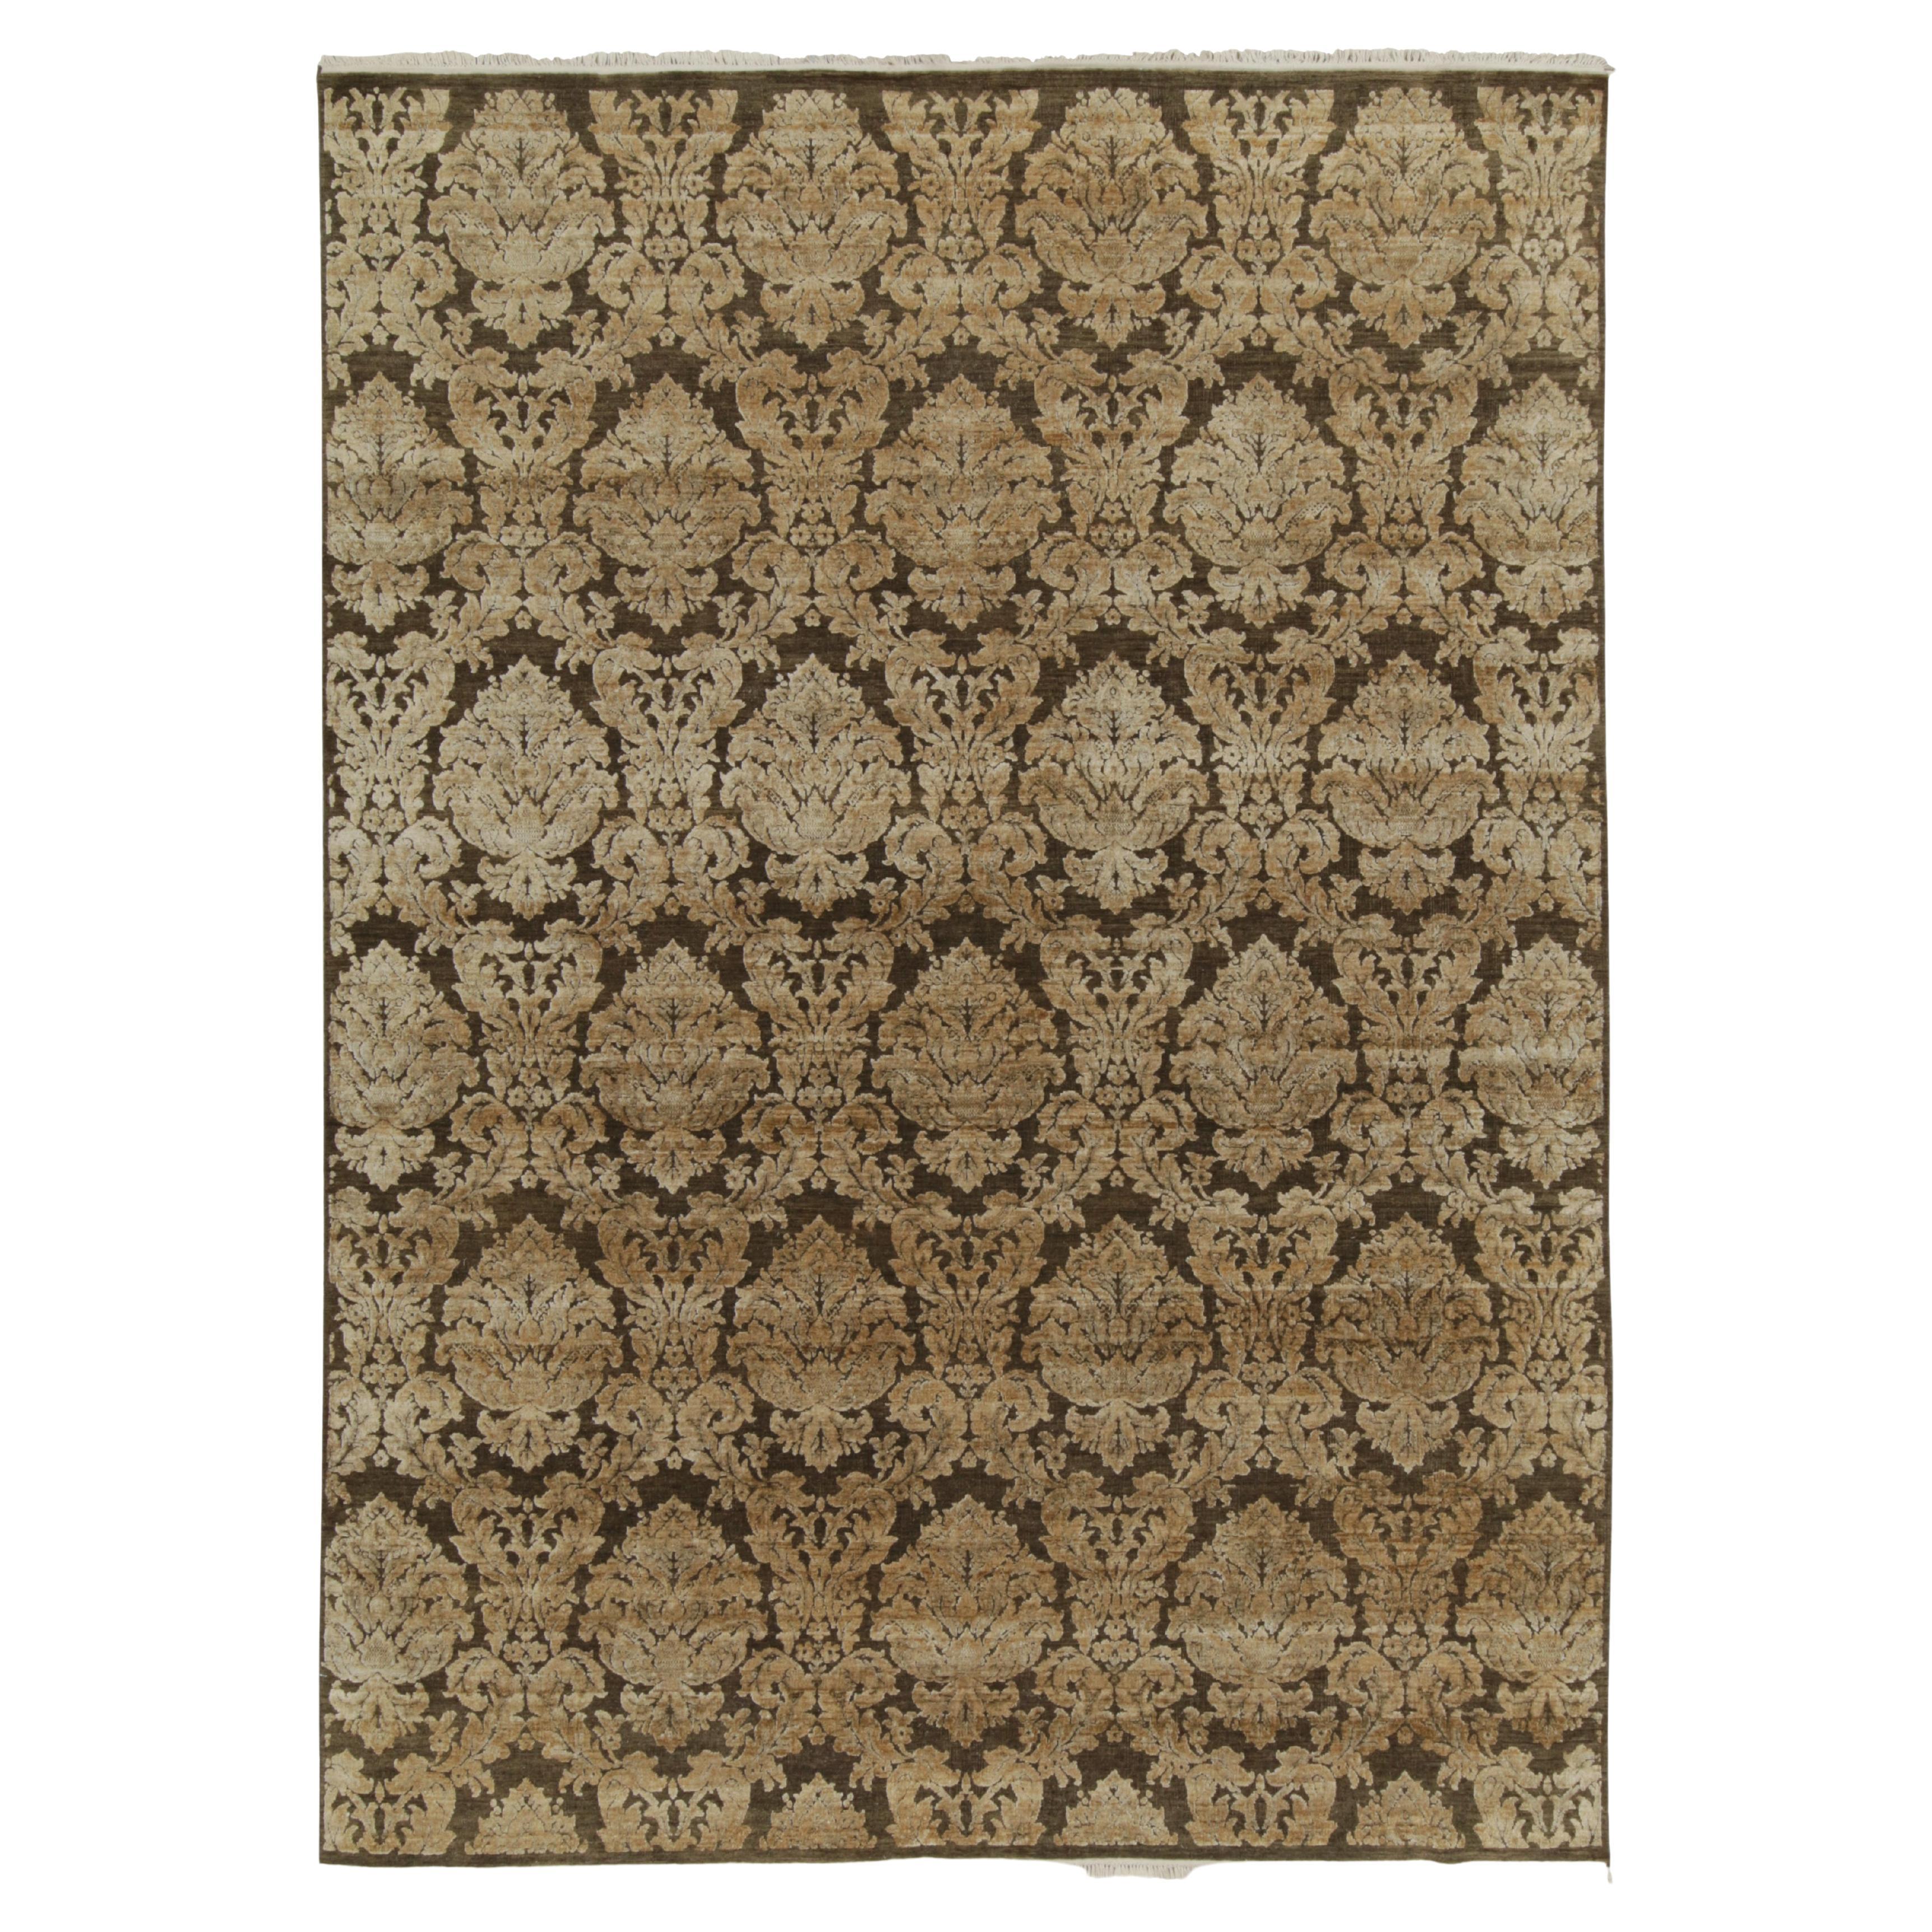 Rug & Kilim’s Classic Italian style rug in Brown with Gold Floral Patterns